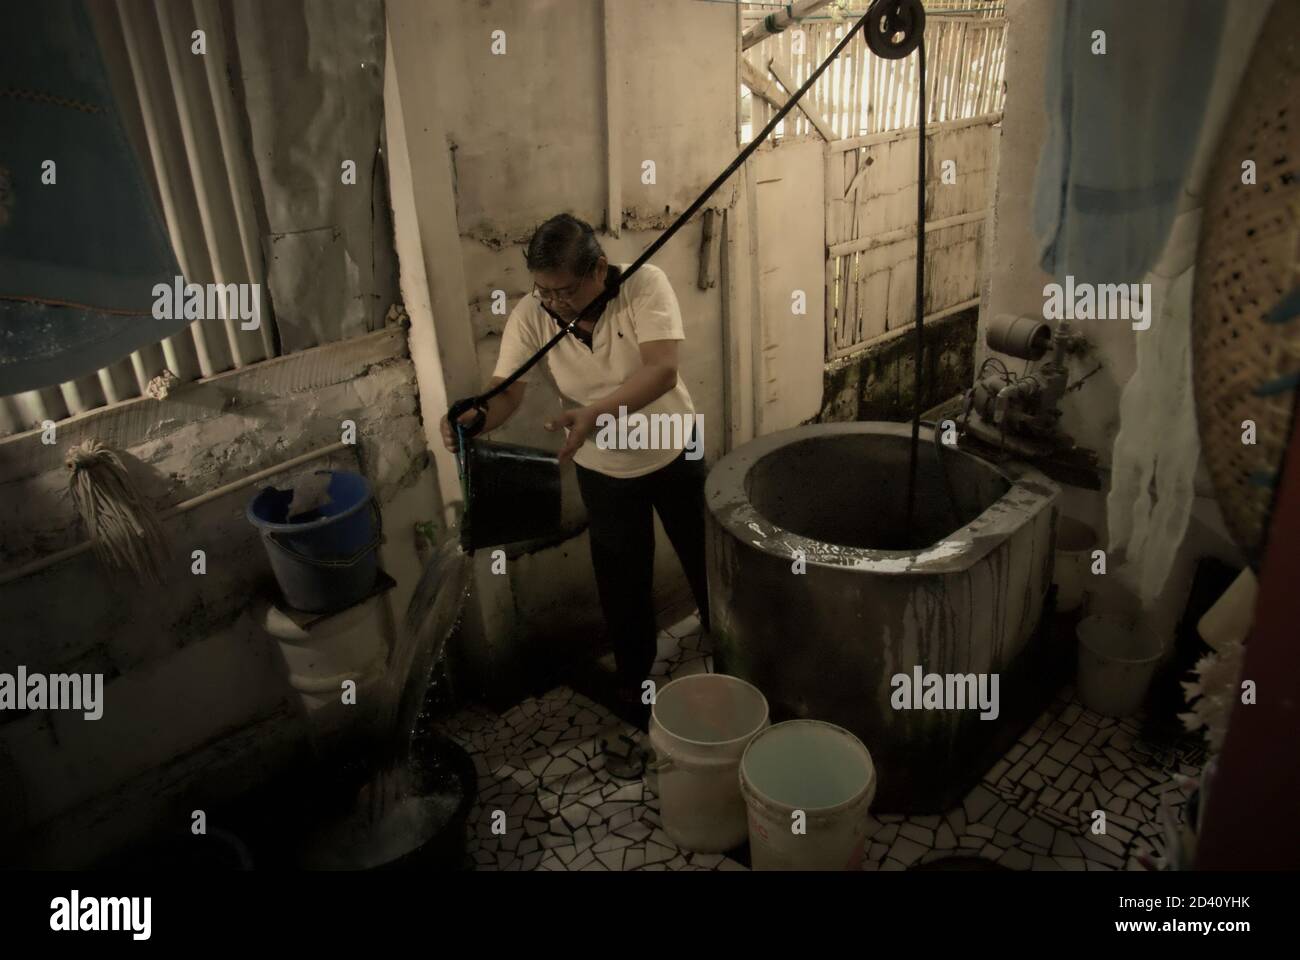 A man is photographed as he is taking water from a water well placed inside his house in a residential area of Jakarta, Indonesia. Stock Photo